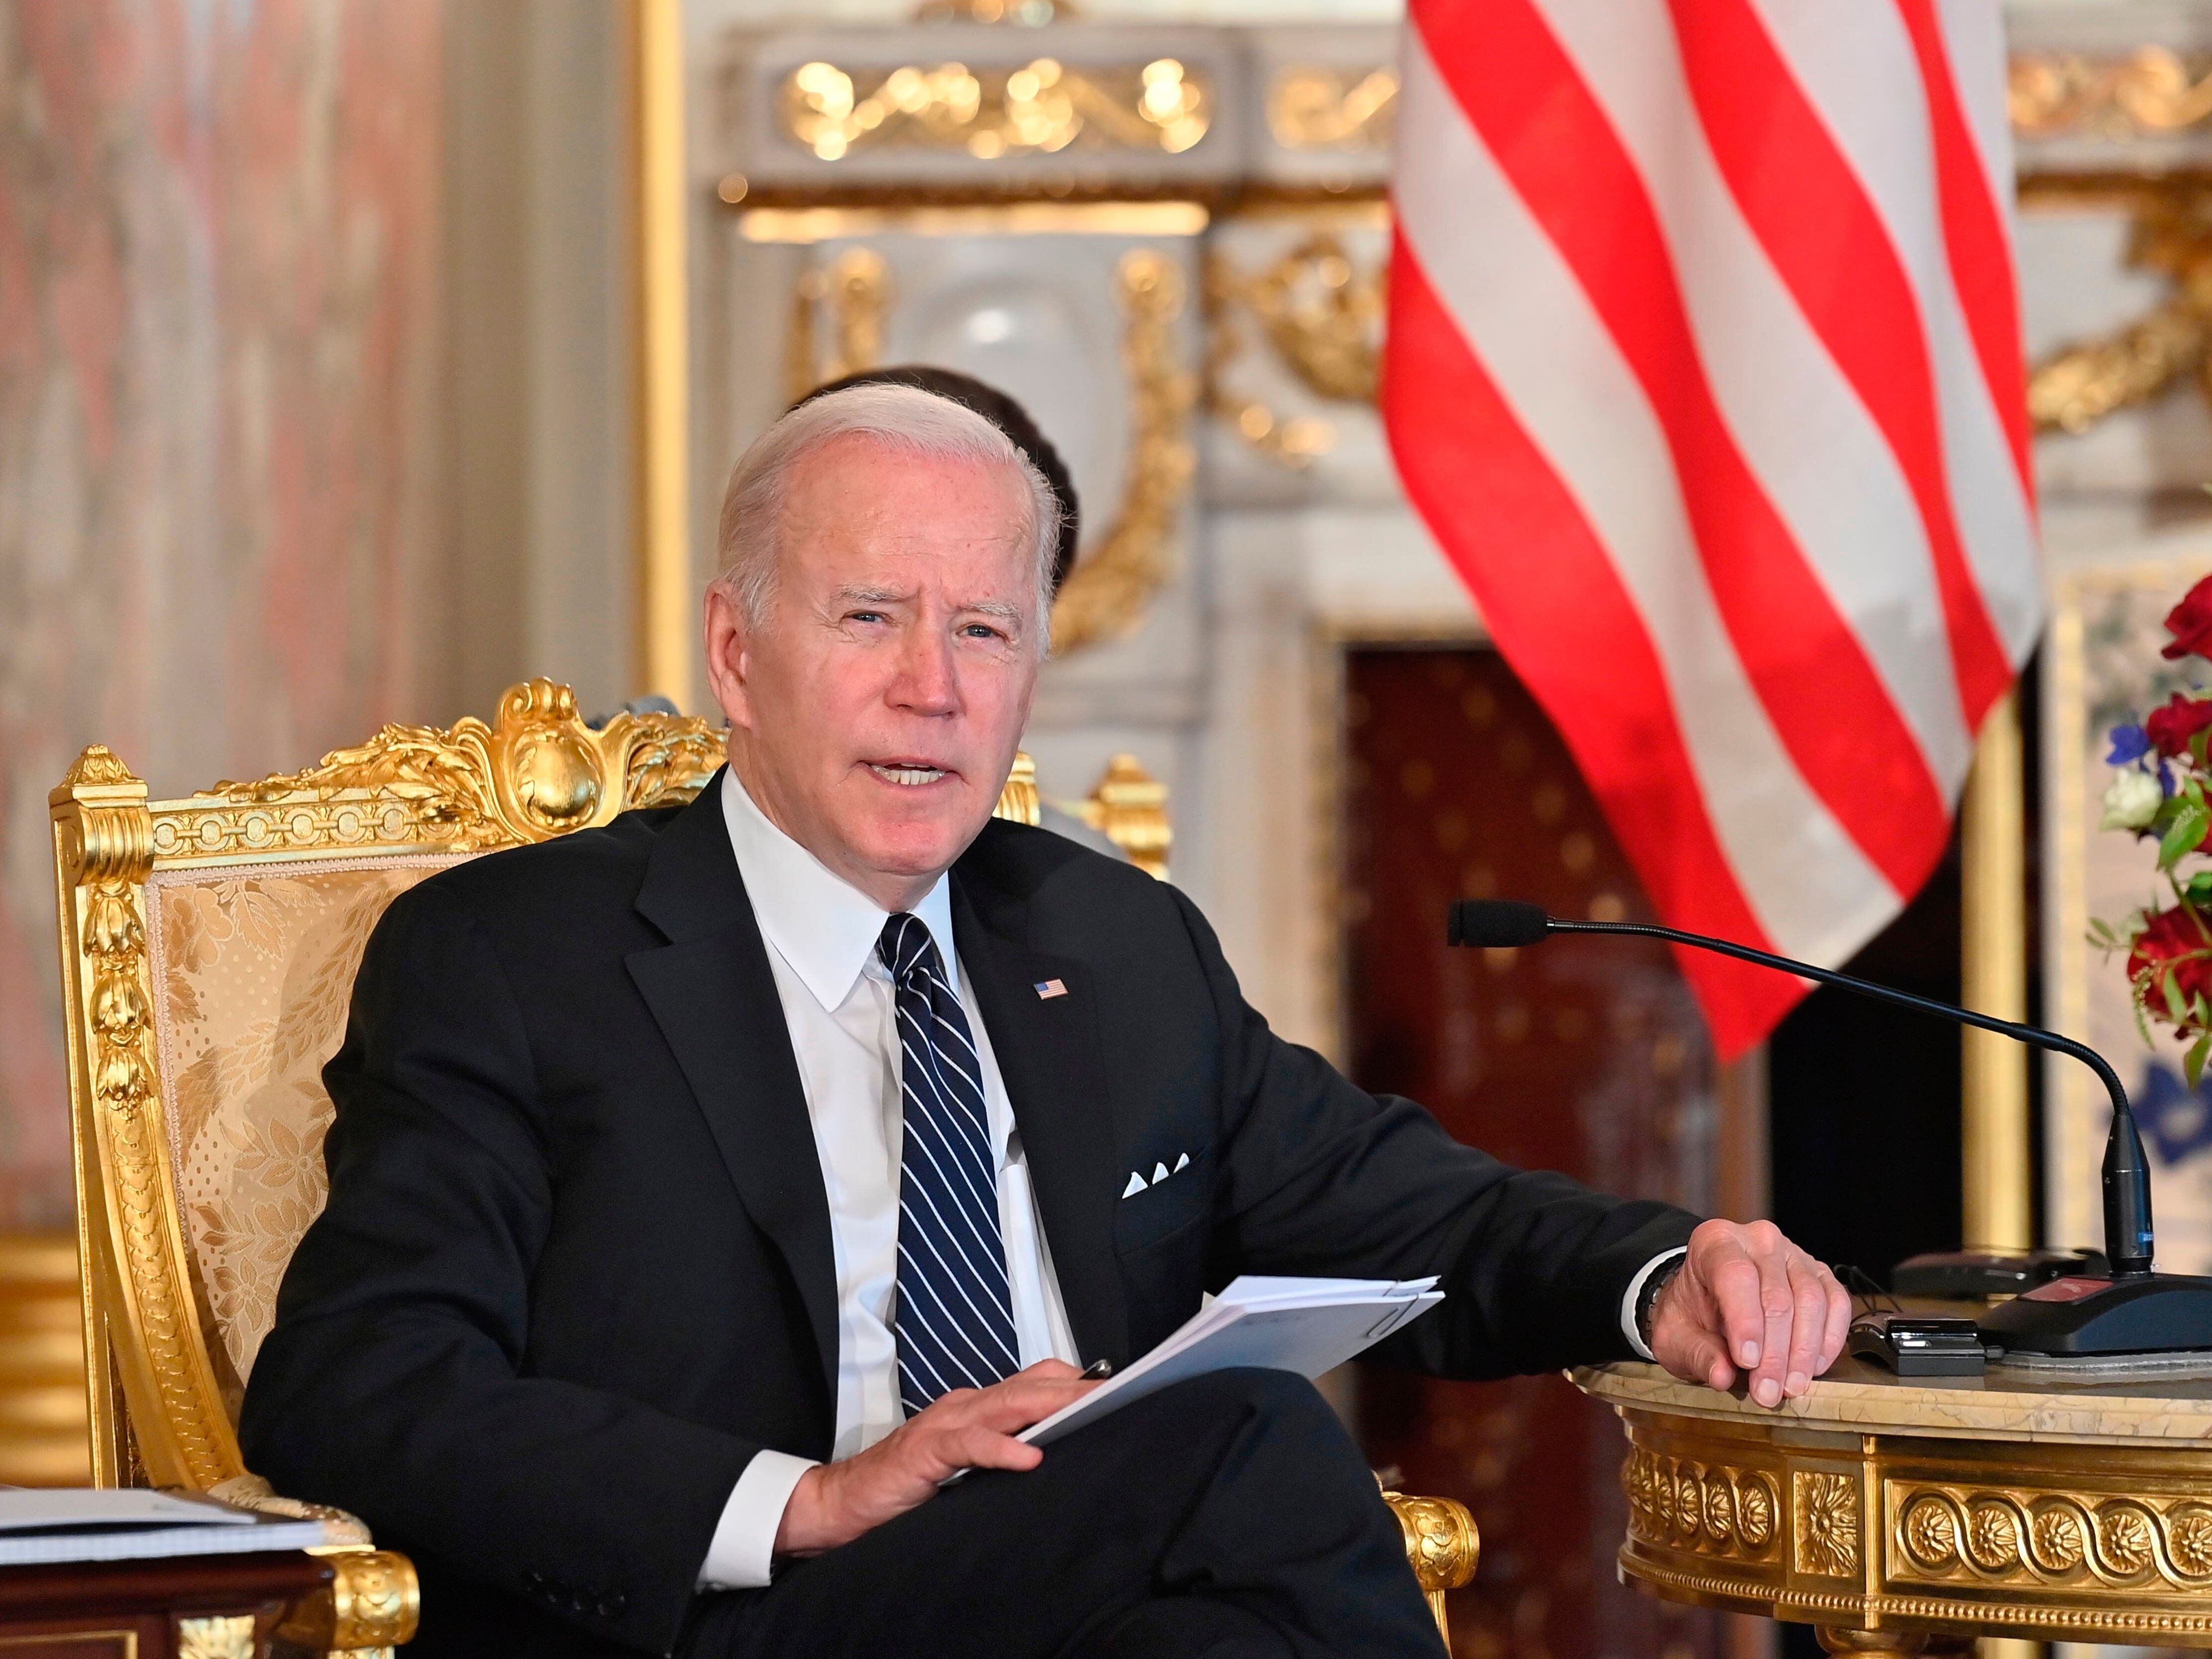 Joe Biden to outline countries joining new Asia trade pact